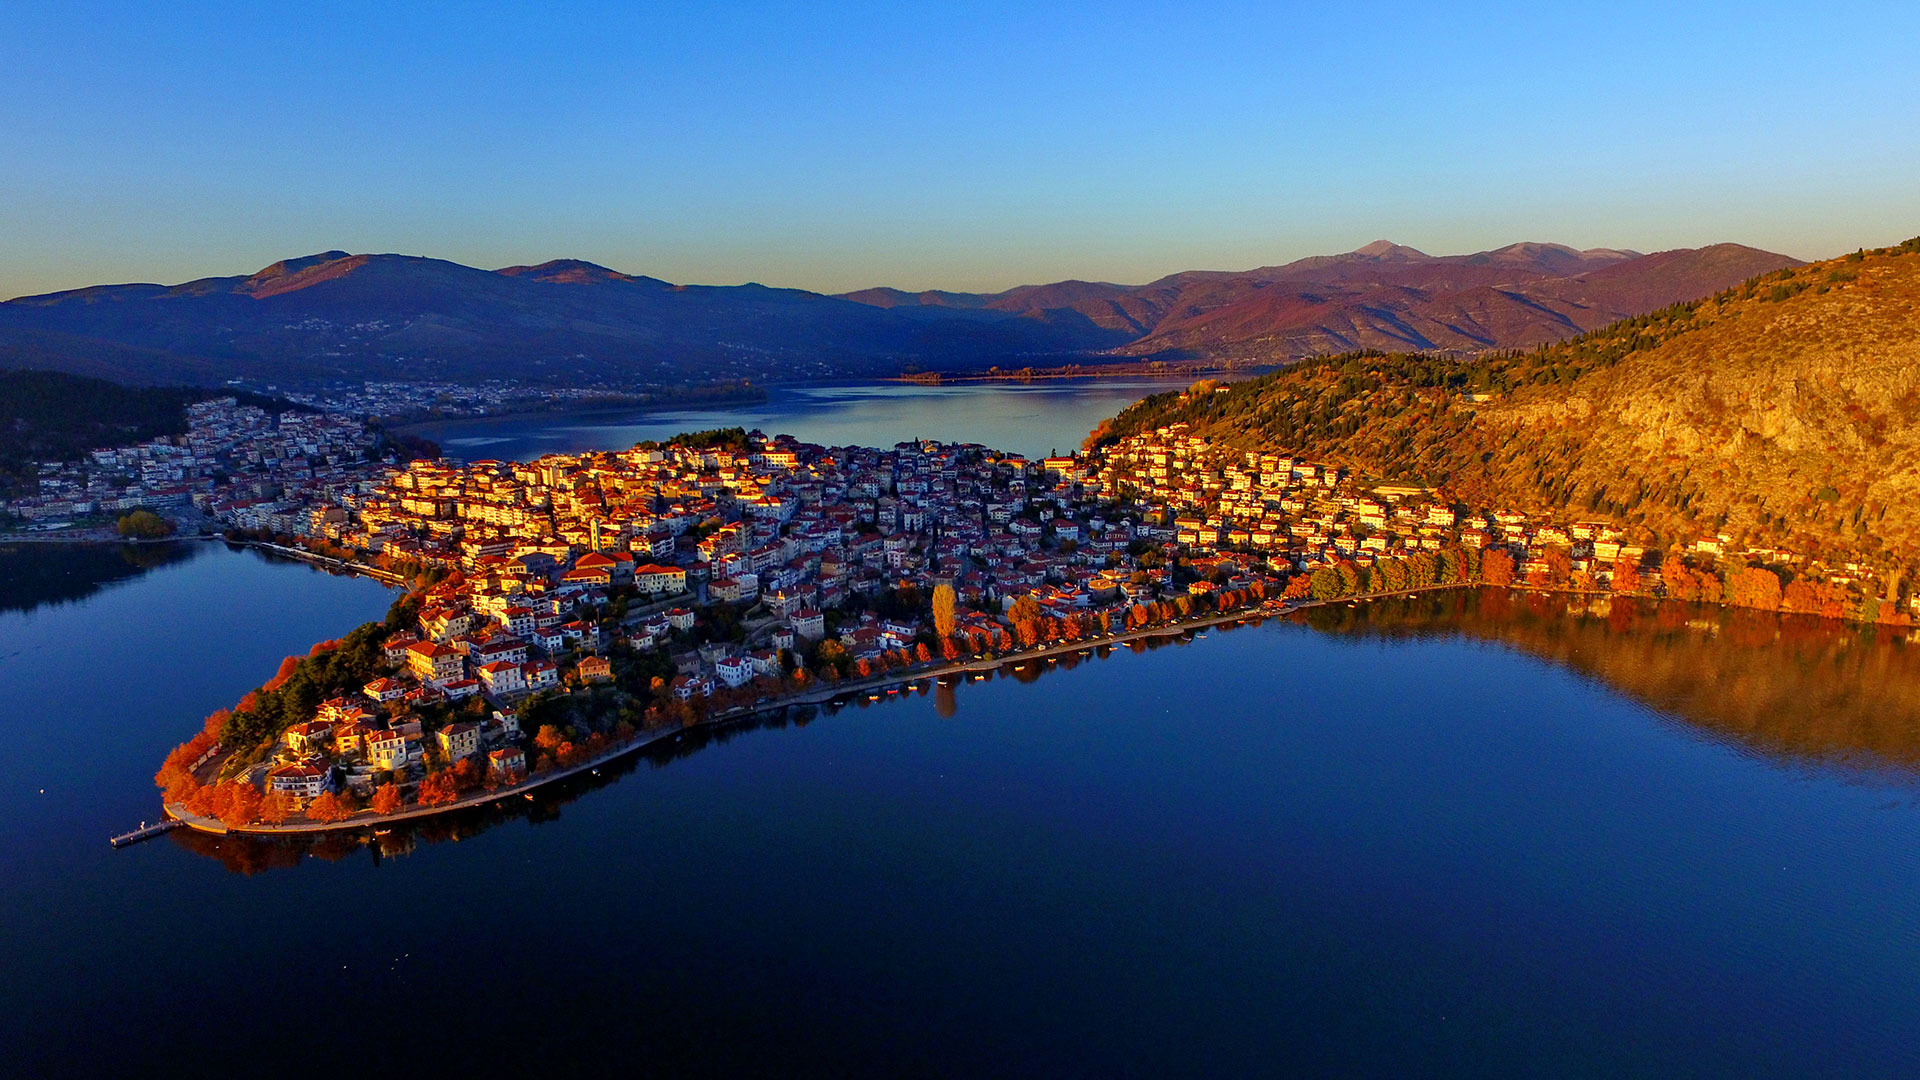 Kastoria, a city with a rich history through the centuries